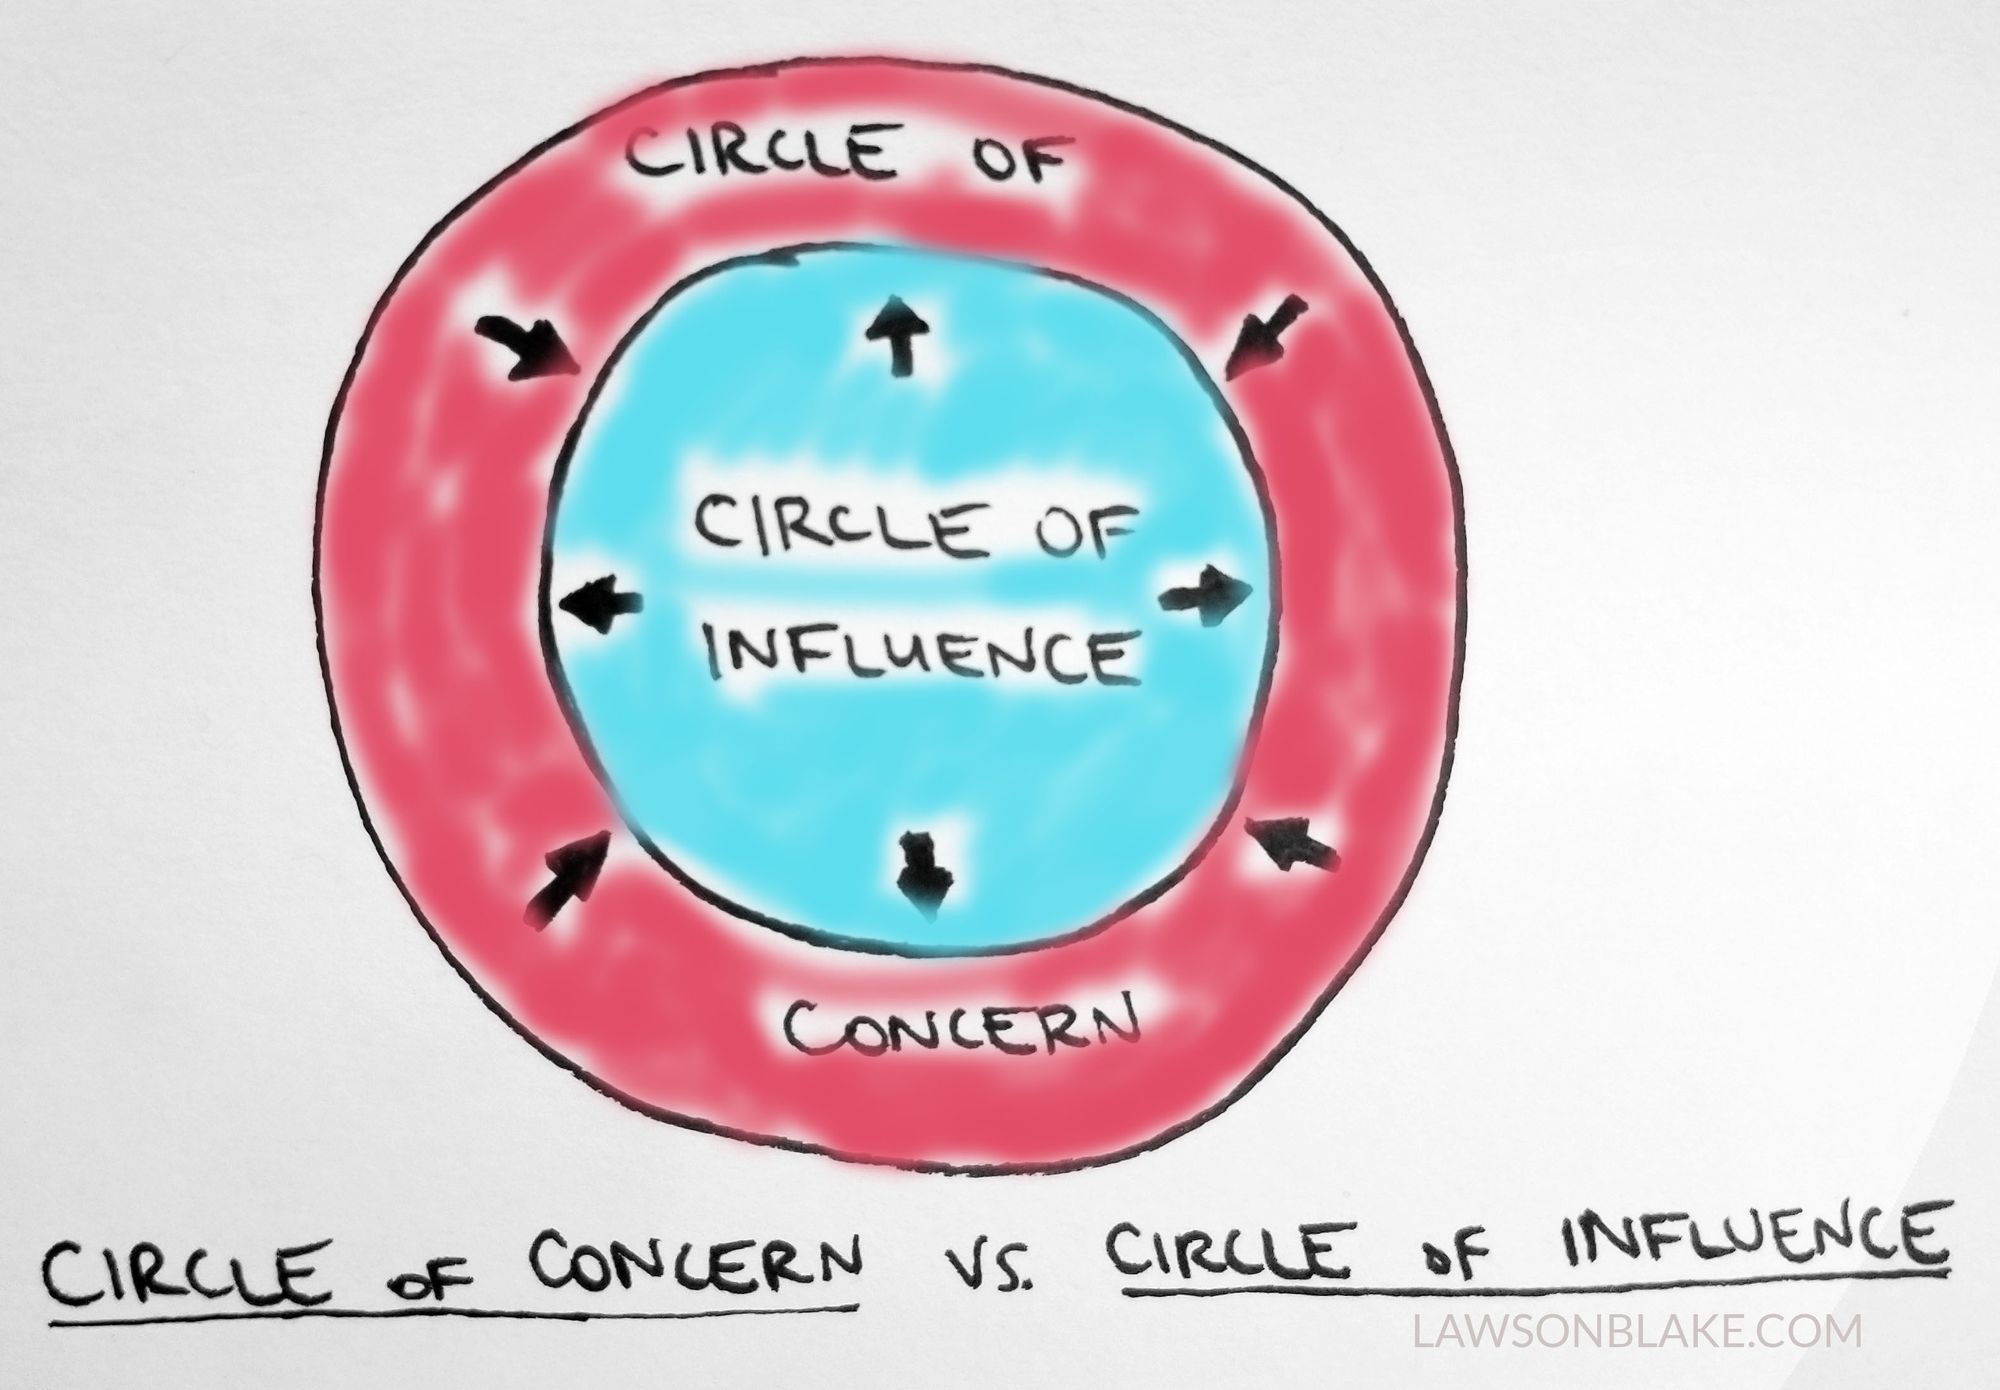 How Big is Your Circle of Influence?